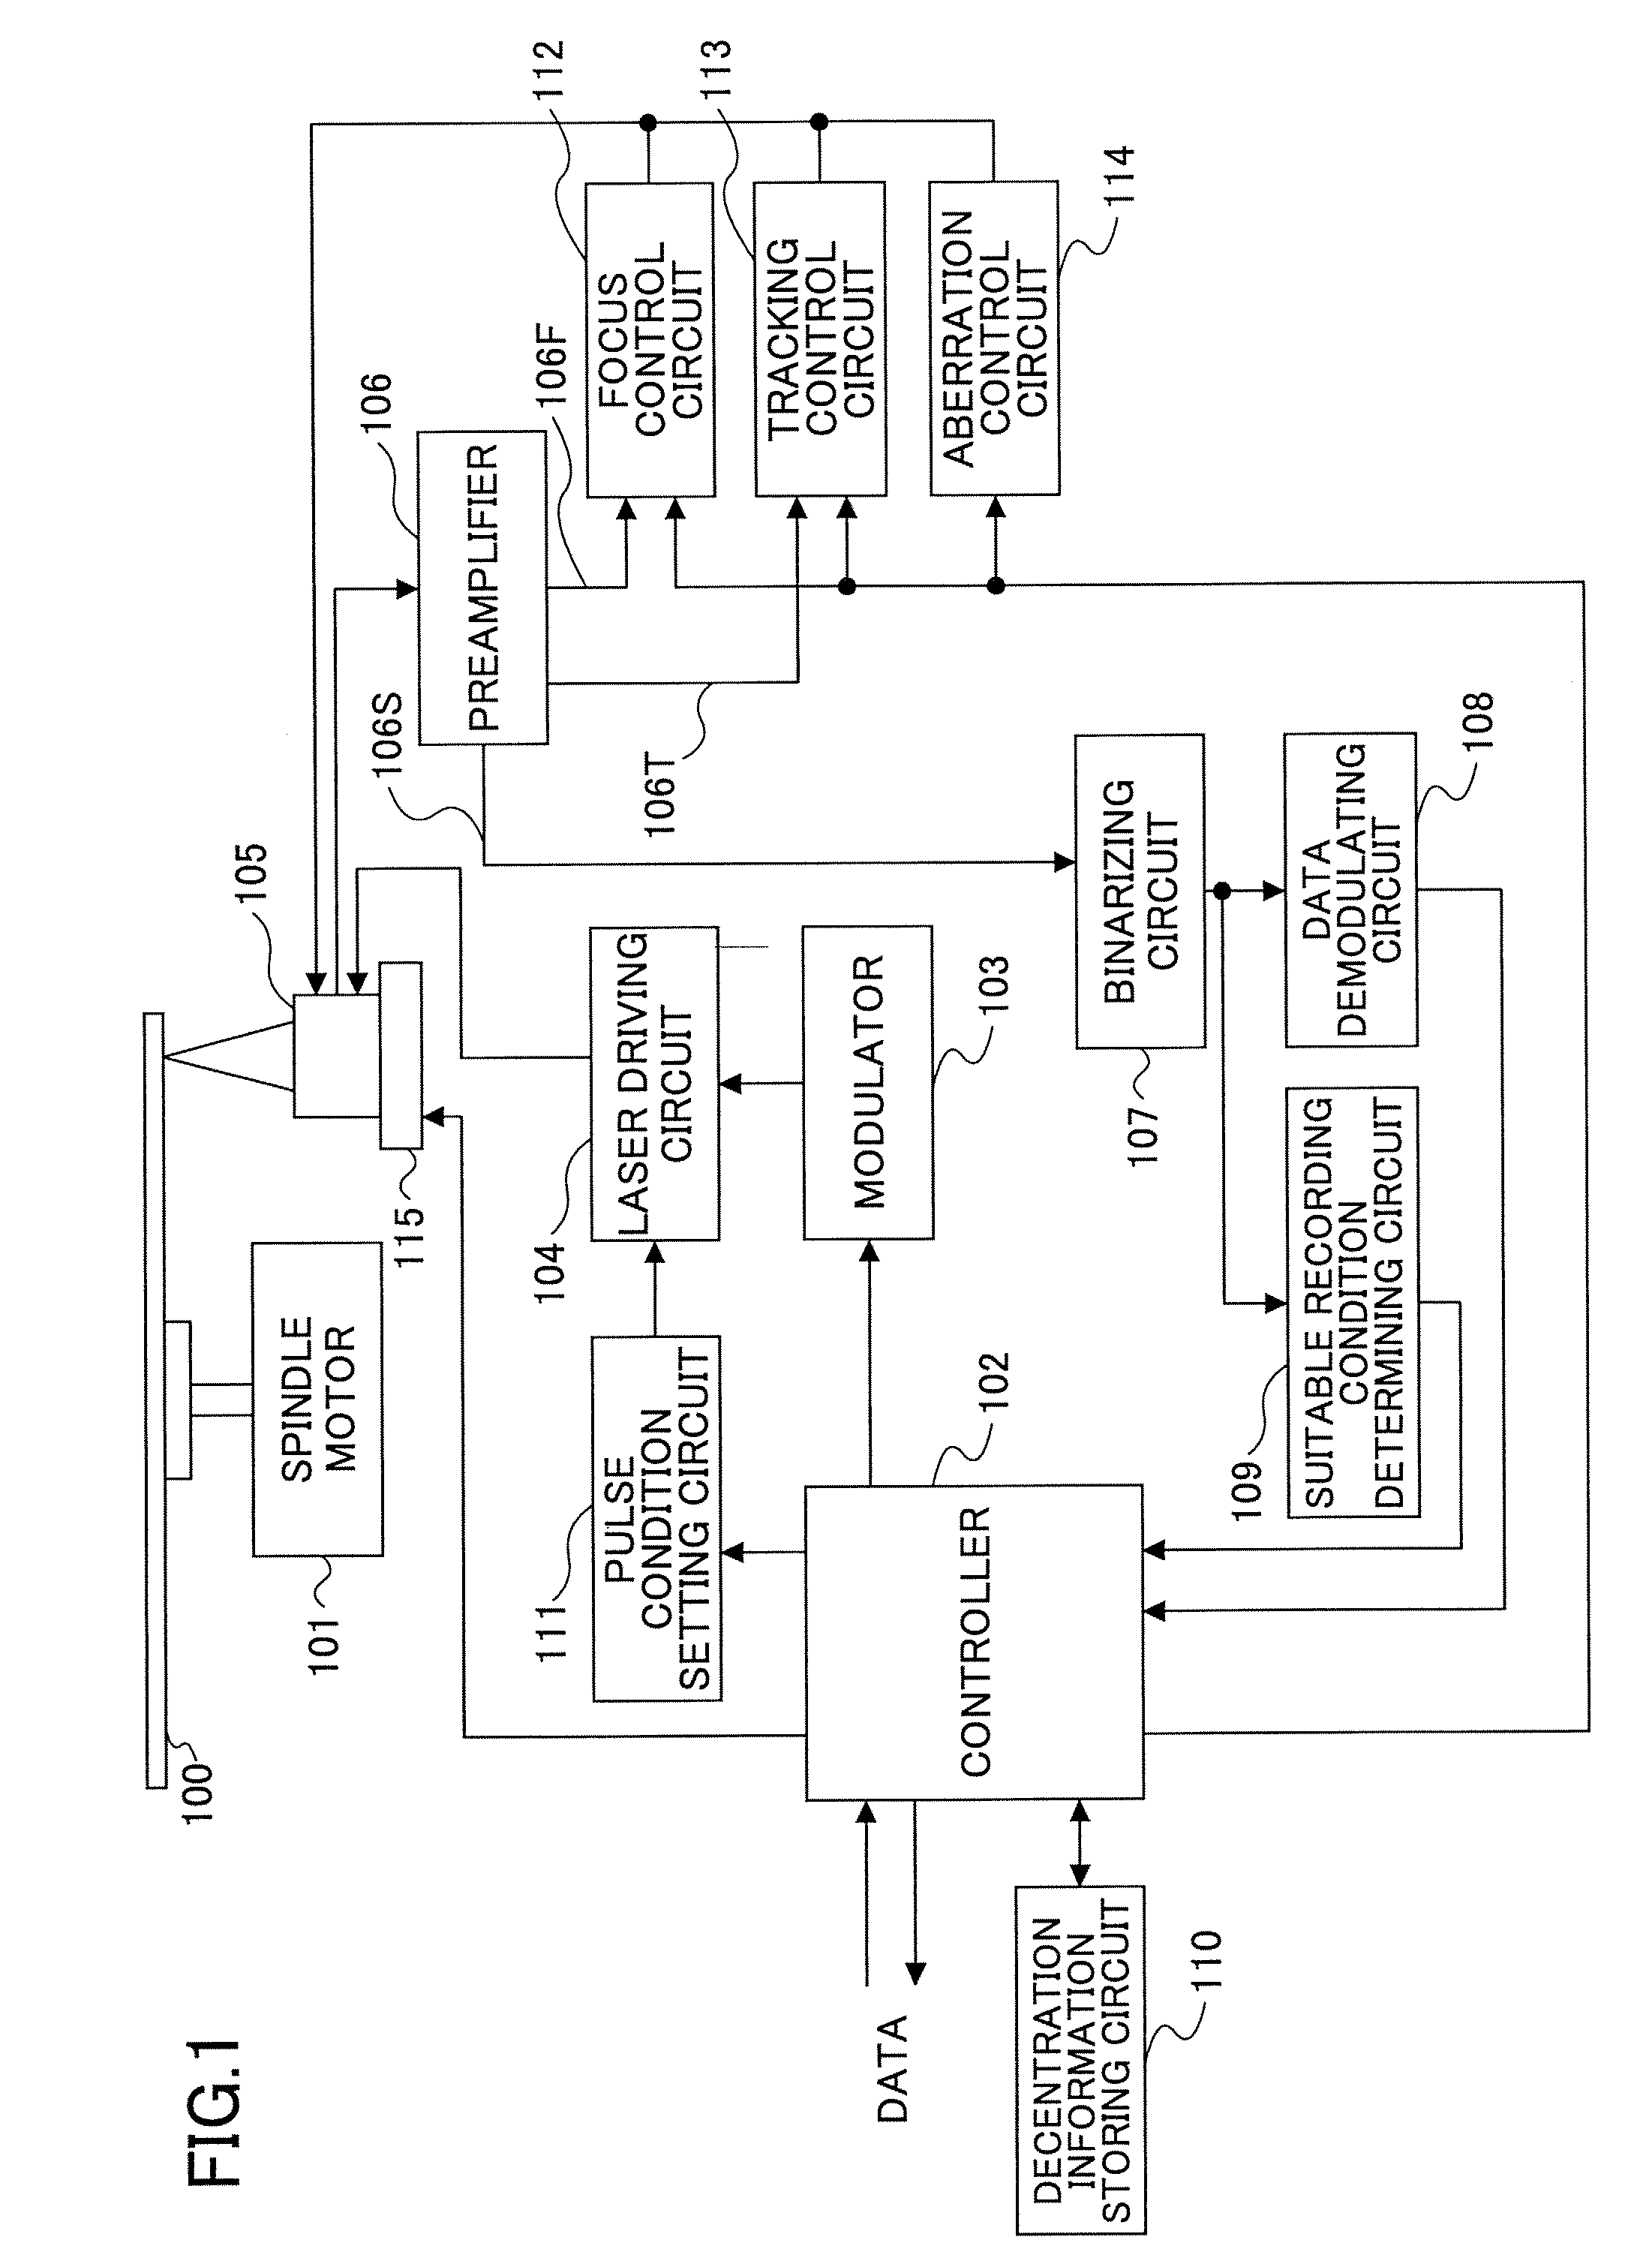 Method of recording data in multilayered recordable optical recording medium, recording and reproducing apparatus for recording the data in the recording medium and the recording medium